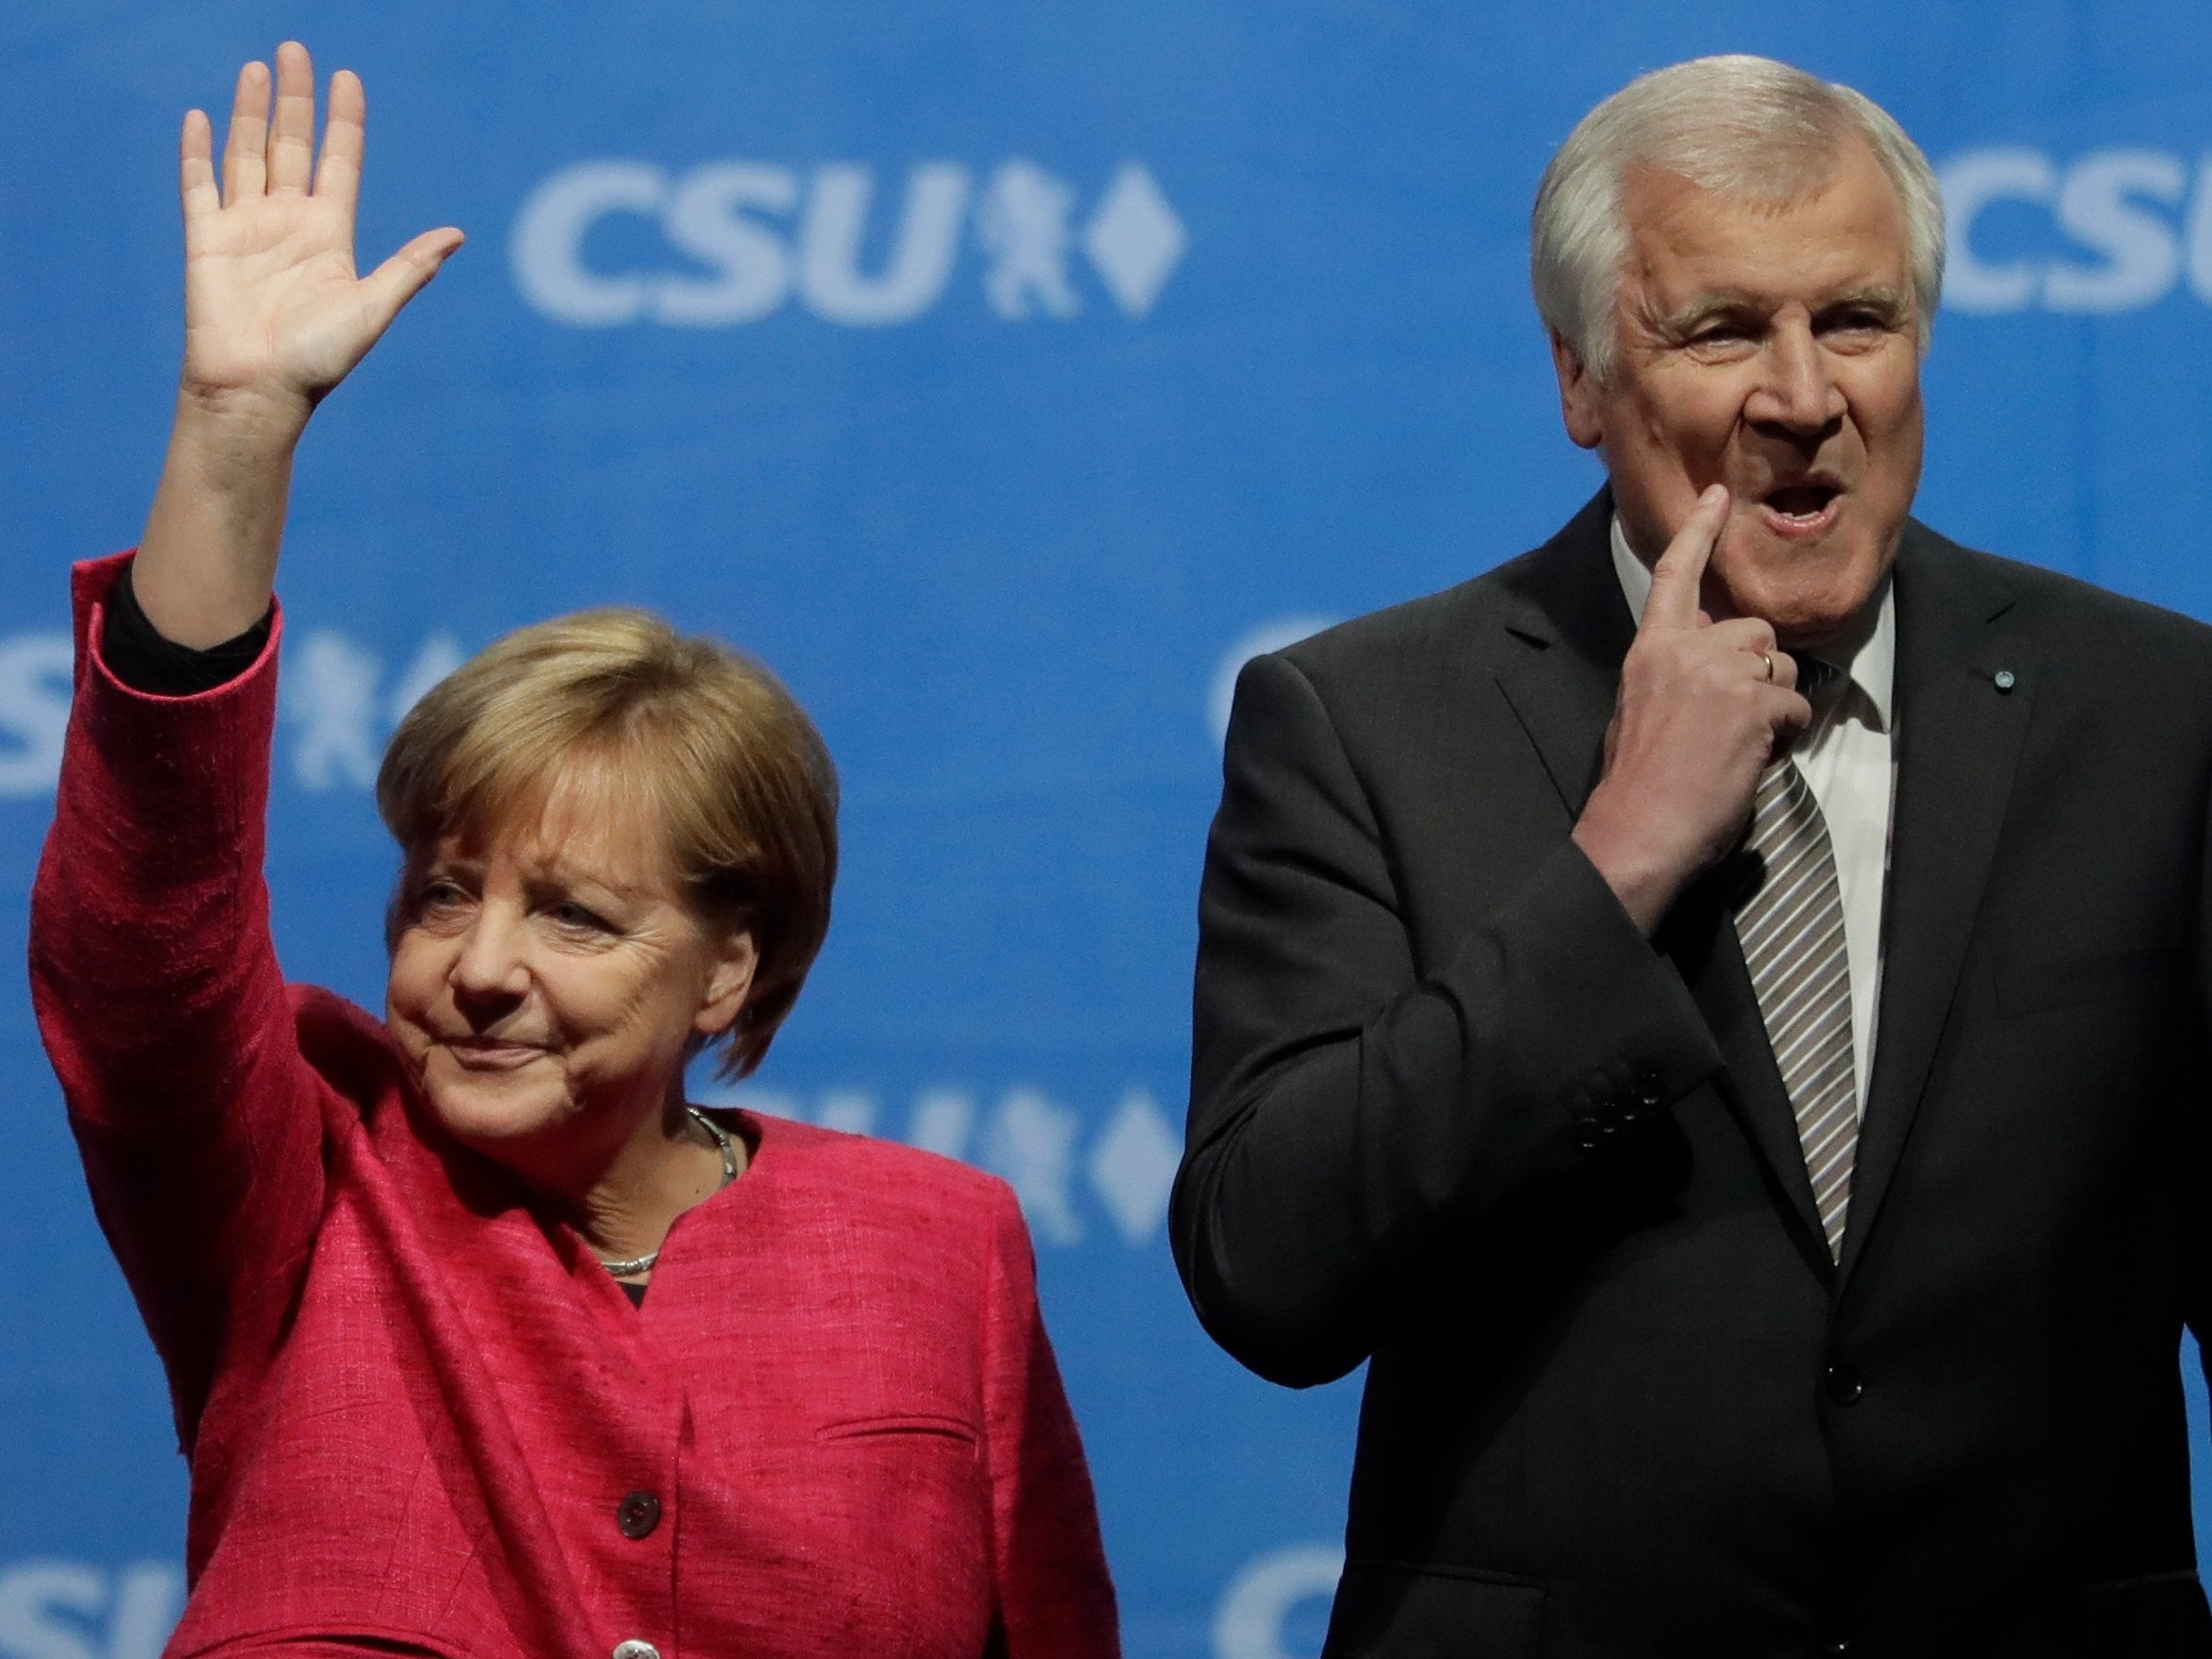 Horst Seehofer, the CSU leader and interior minister, has proved a constant thorn in Merkel’s side